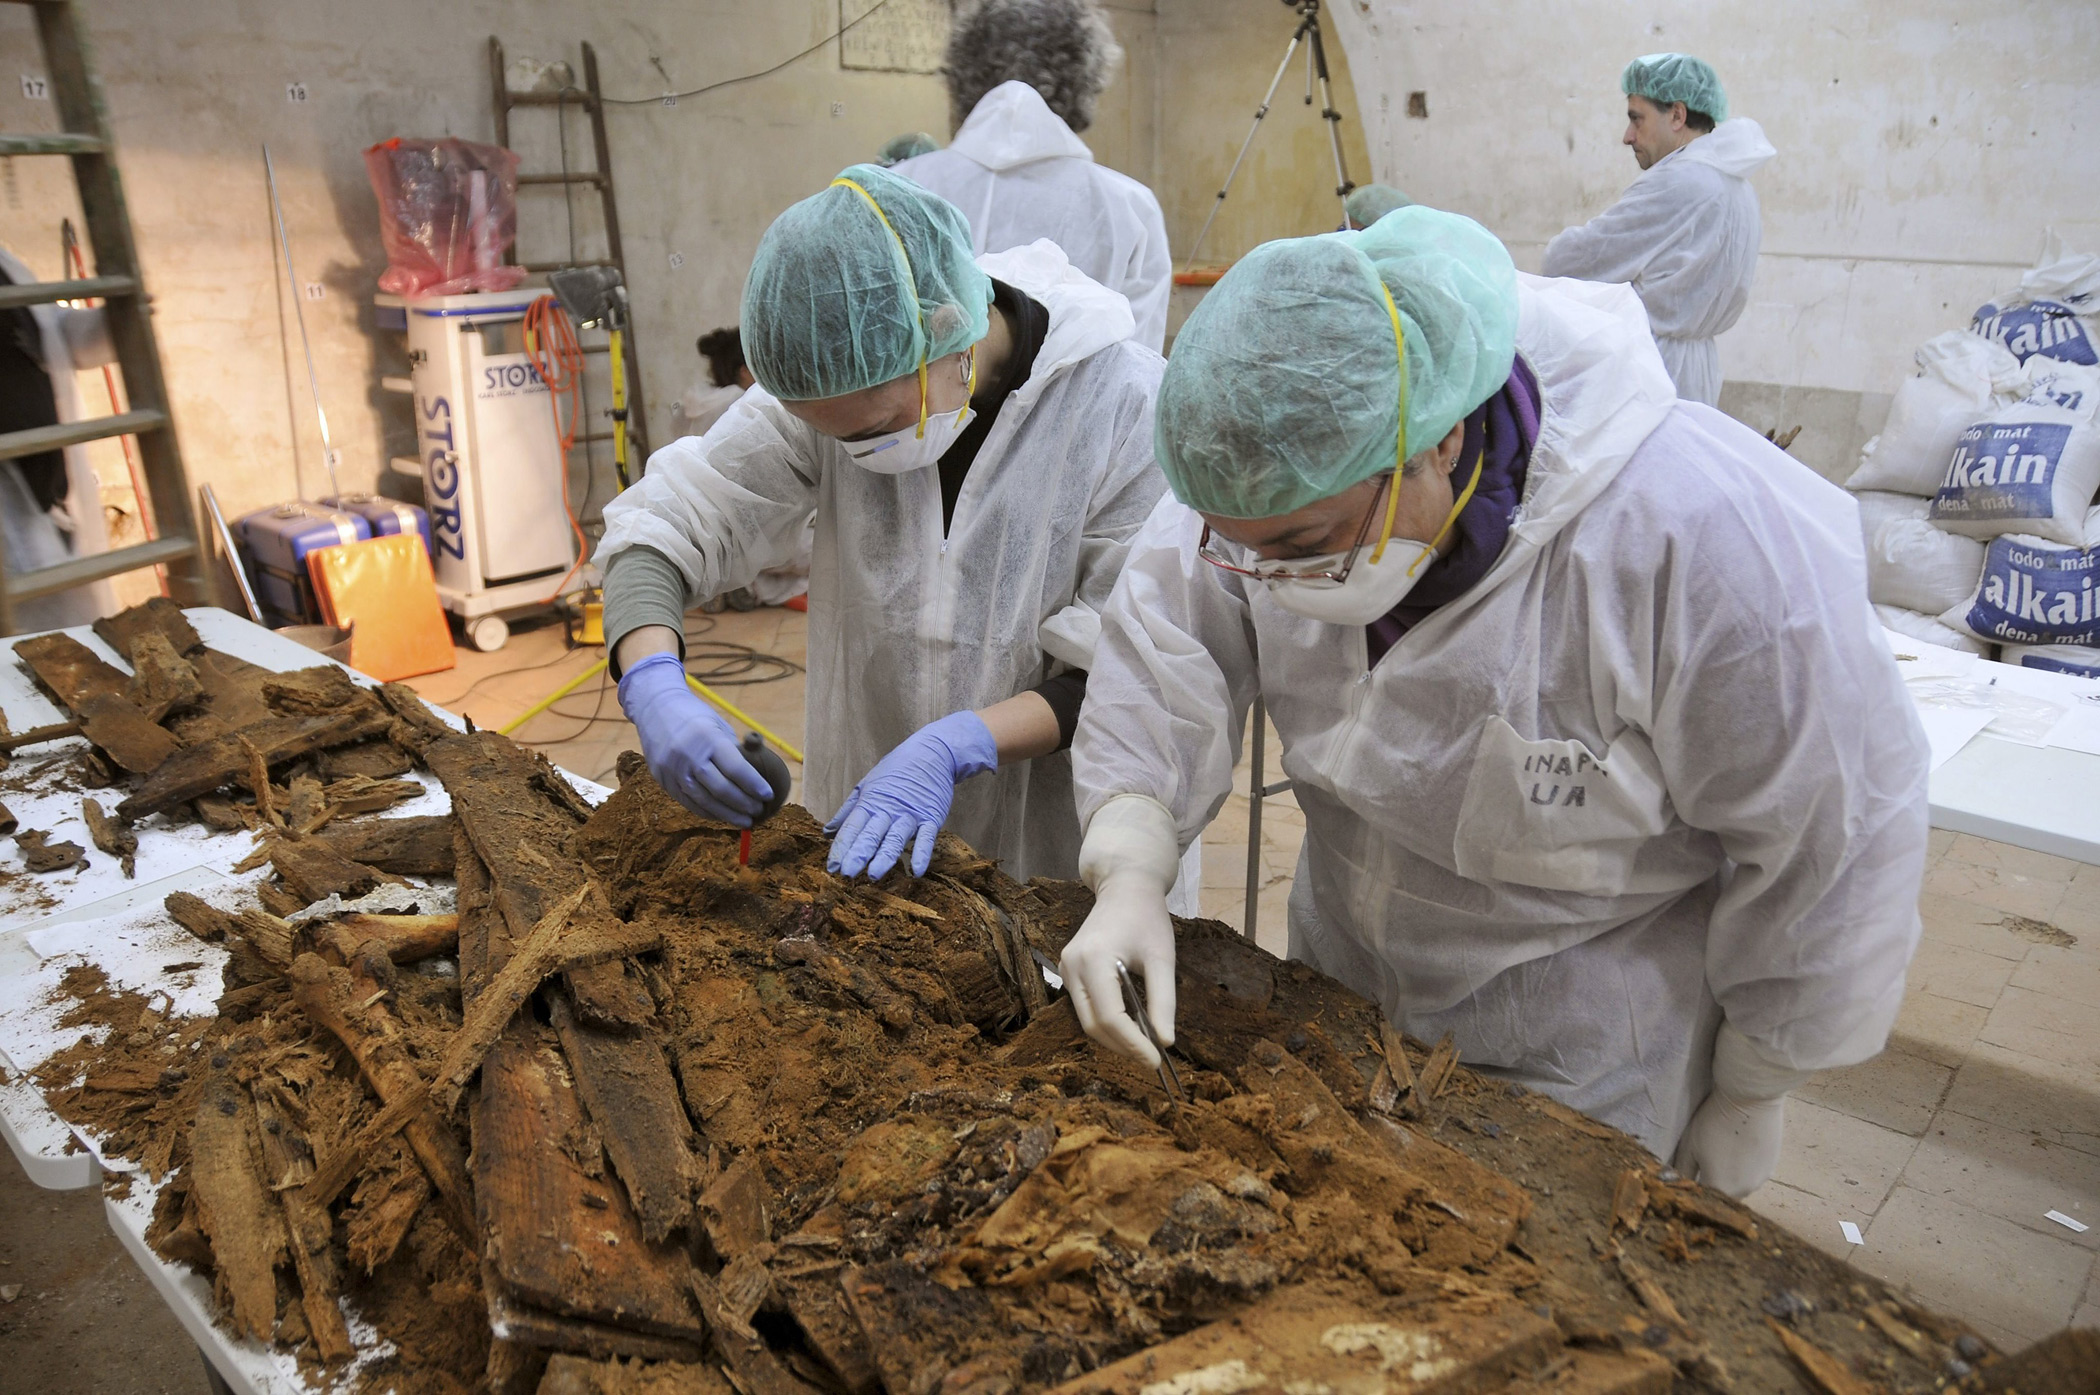 Search of human remains of Cervantes continues